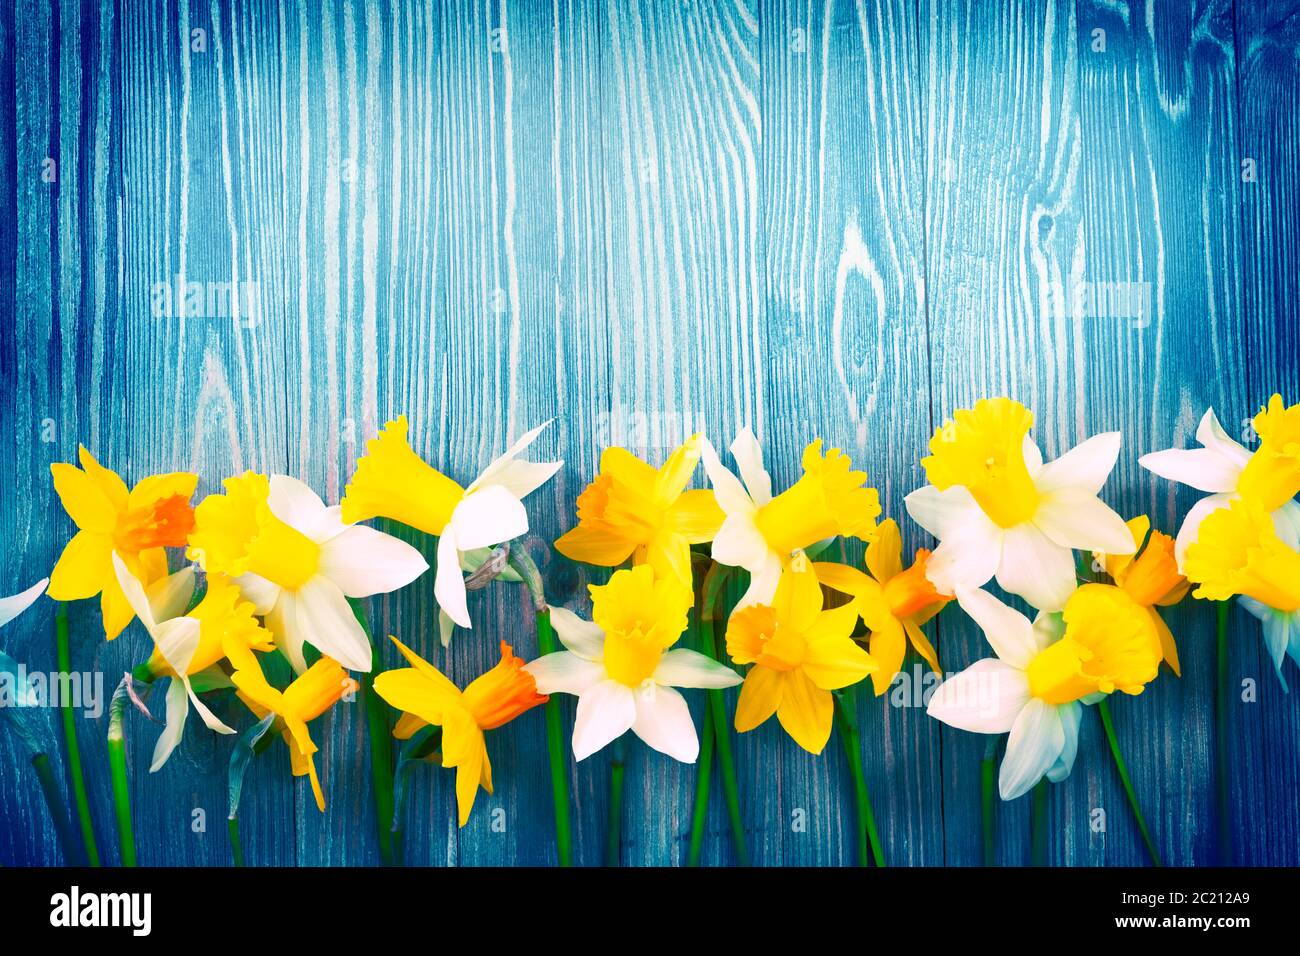 Daffodil flowers on blue wooden background Stock Photo